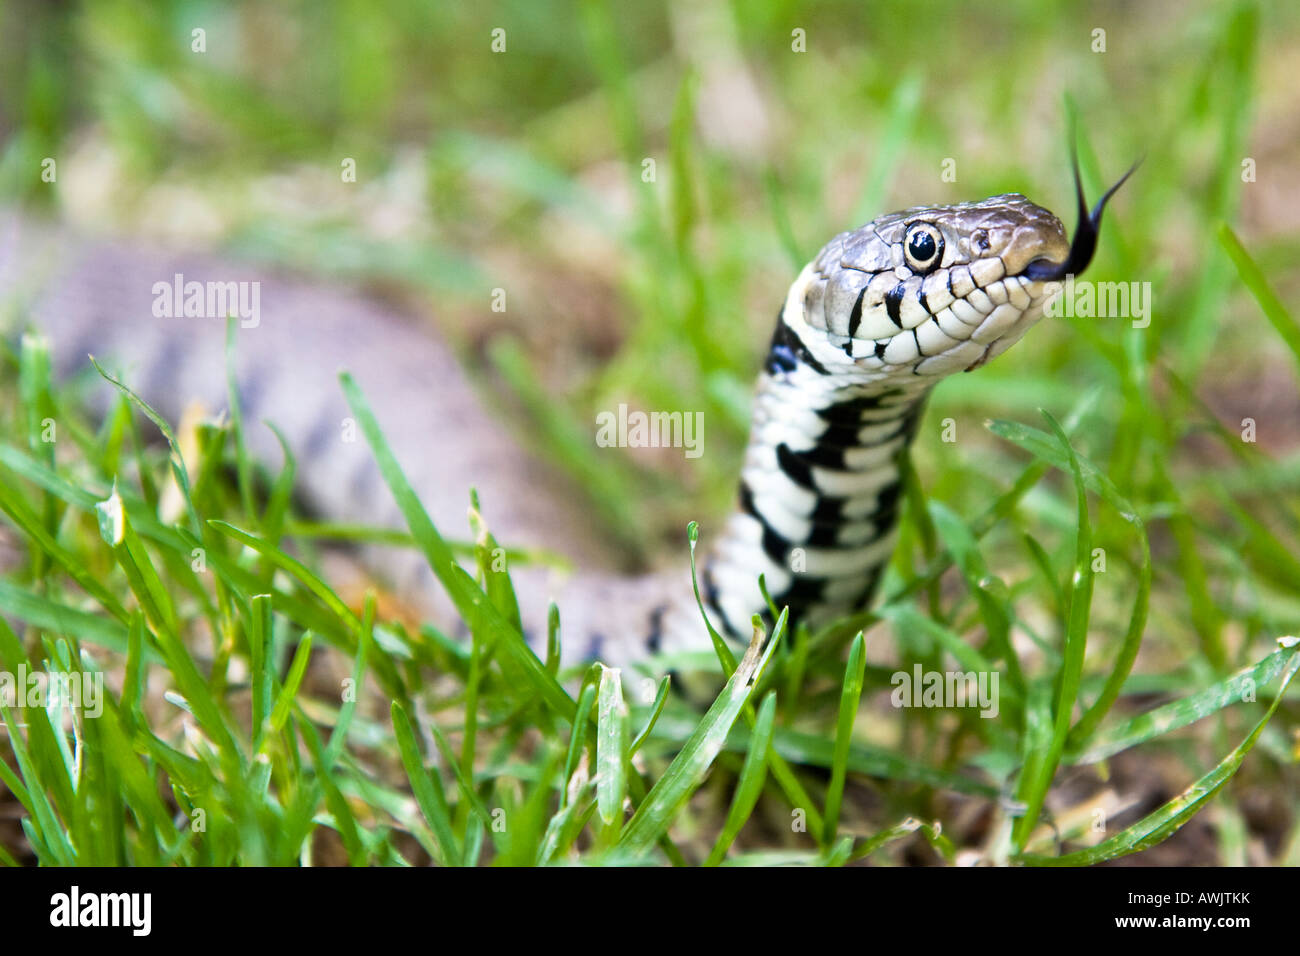 Grass snake with forked tongue sticking out Stock Photo